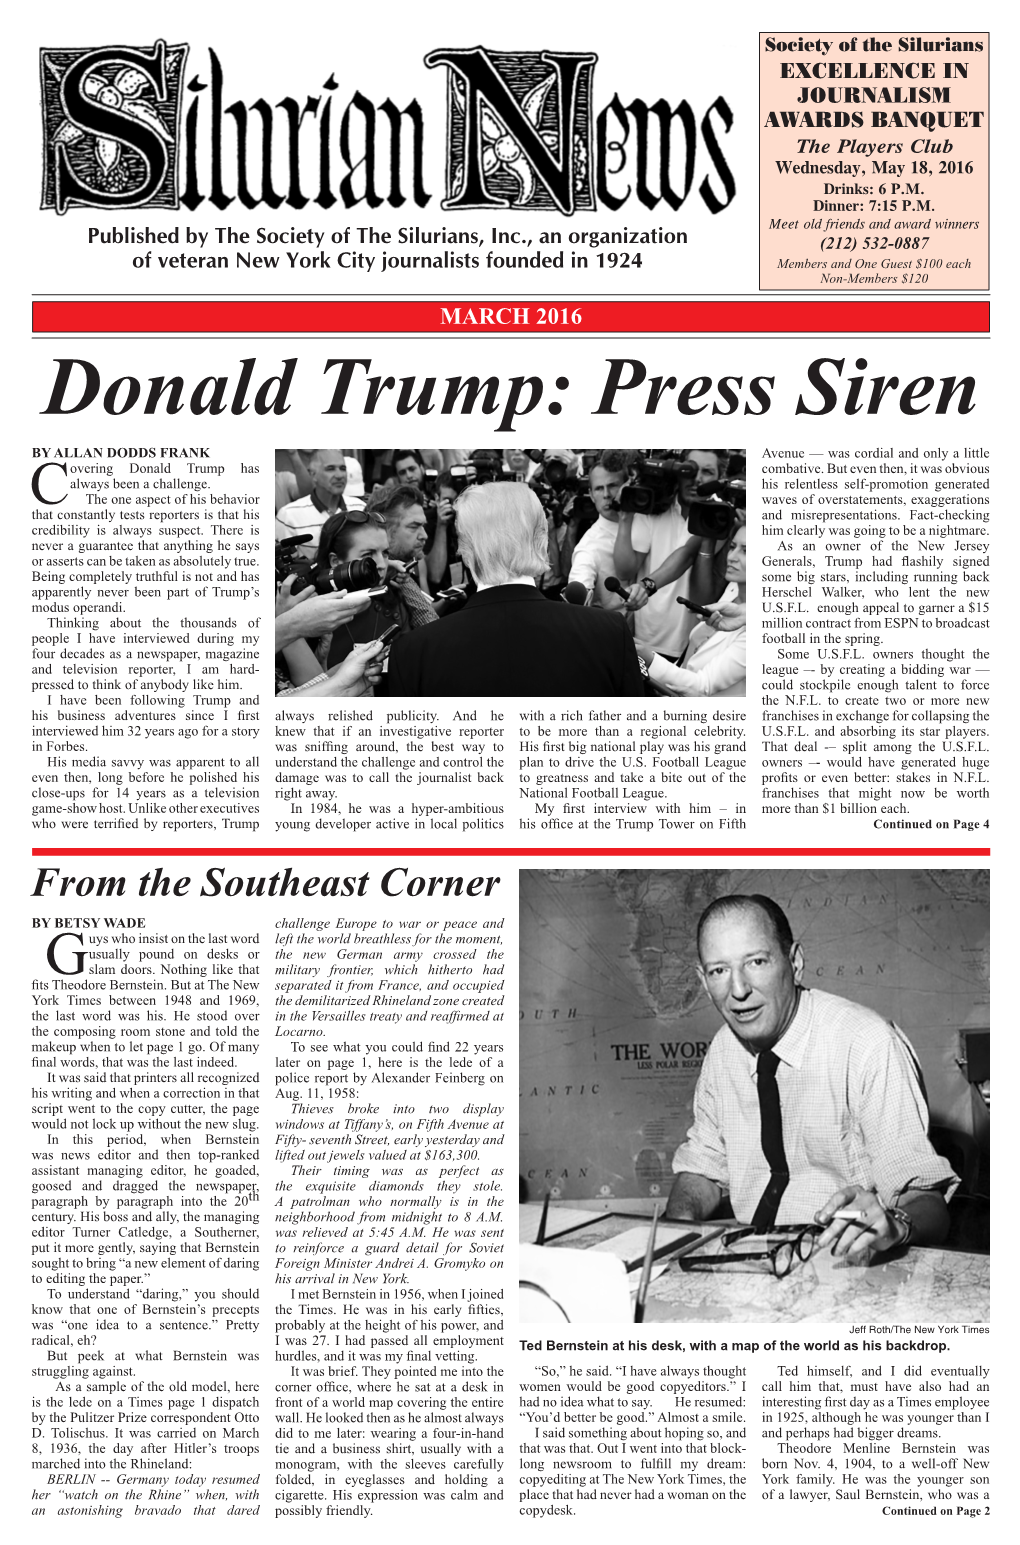 Donald Trump: Press Siren by ALLAN DODDS FRANK Avenue — Was Cordial and Only a Little Overing Donald Trump Has Combative